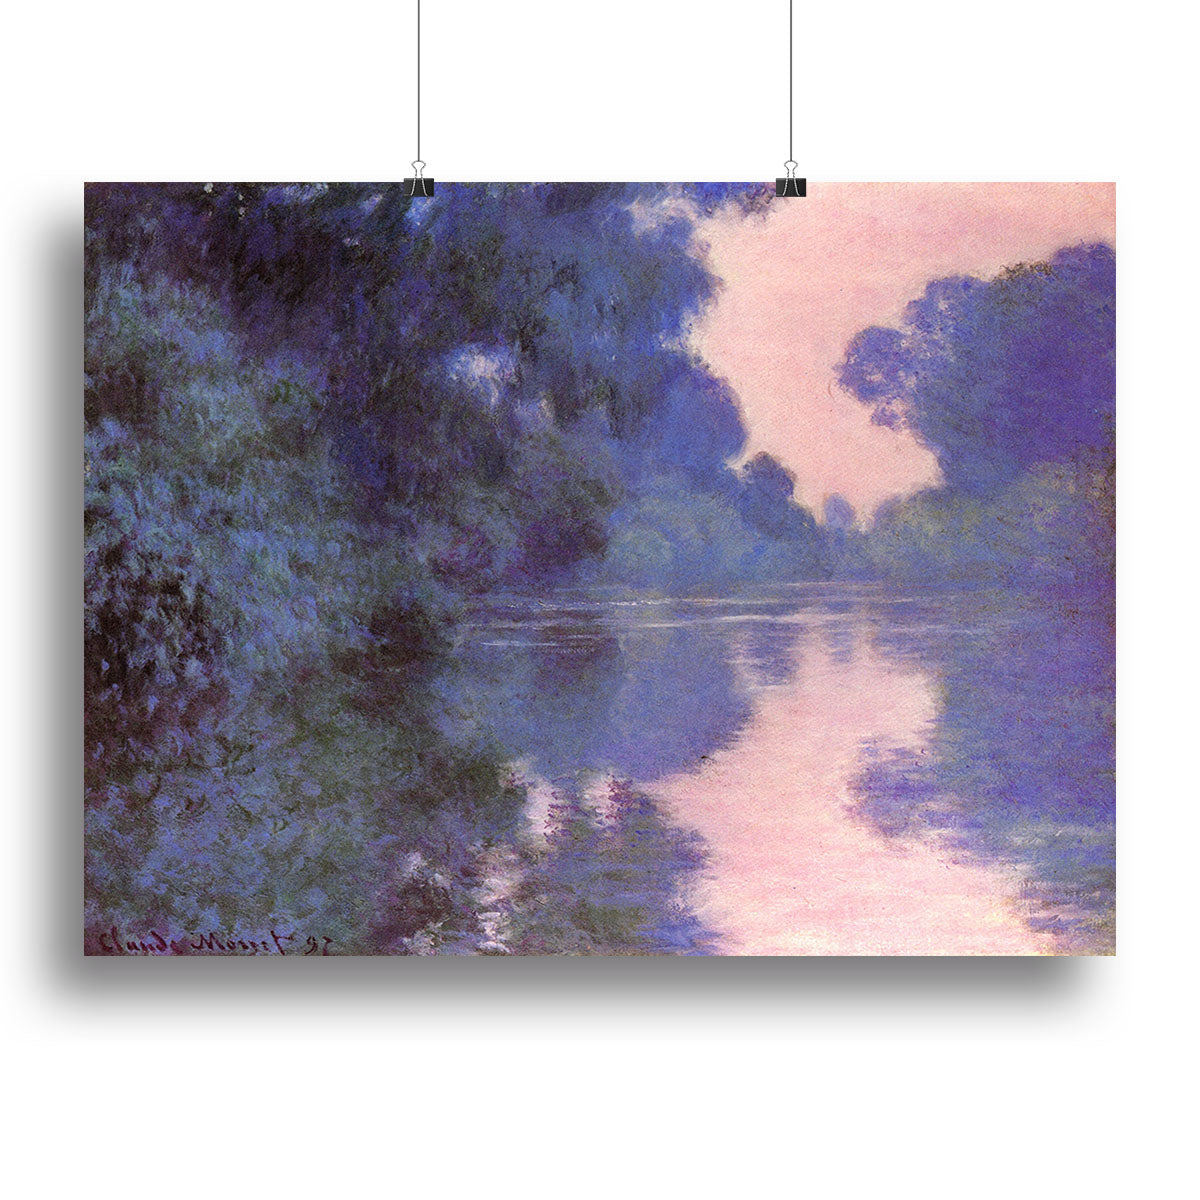 Seine arm at Giverny by Monet Canvas Print or Poster - Canvas Art Rocks - 2